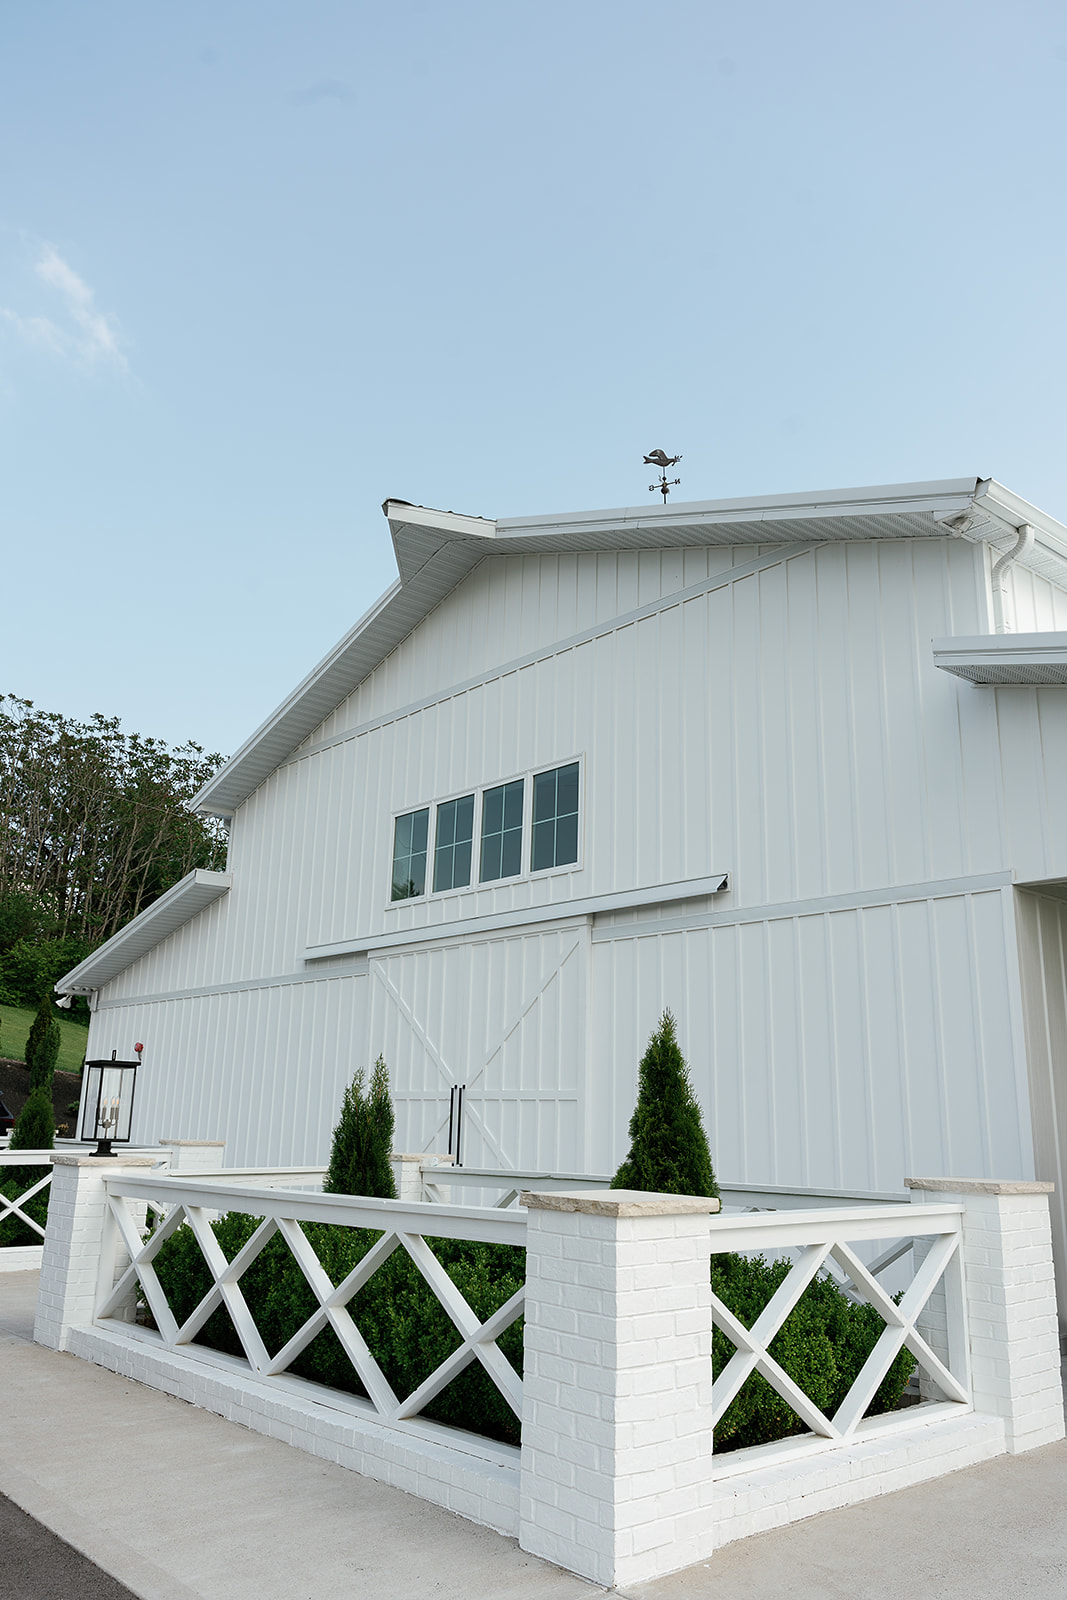 A view of the outside of The White Dove Barn and garden